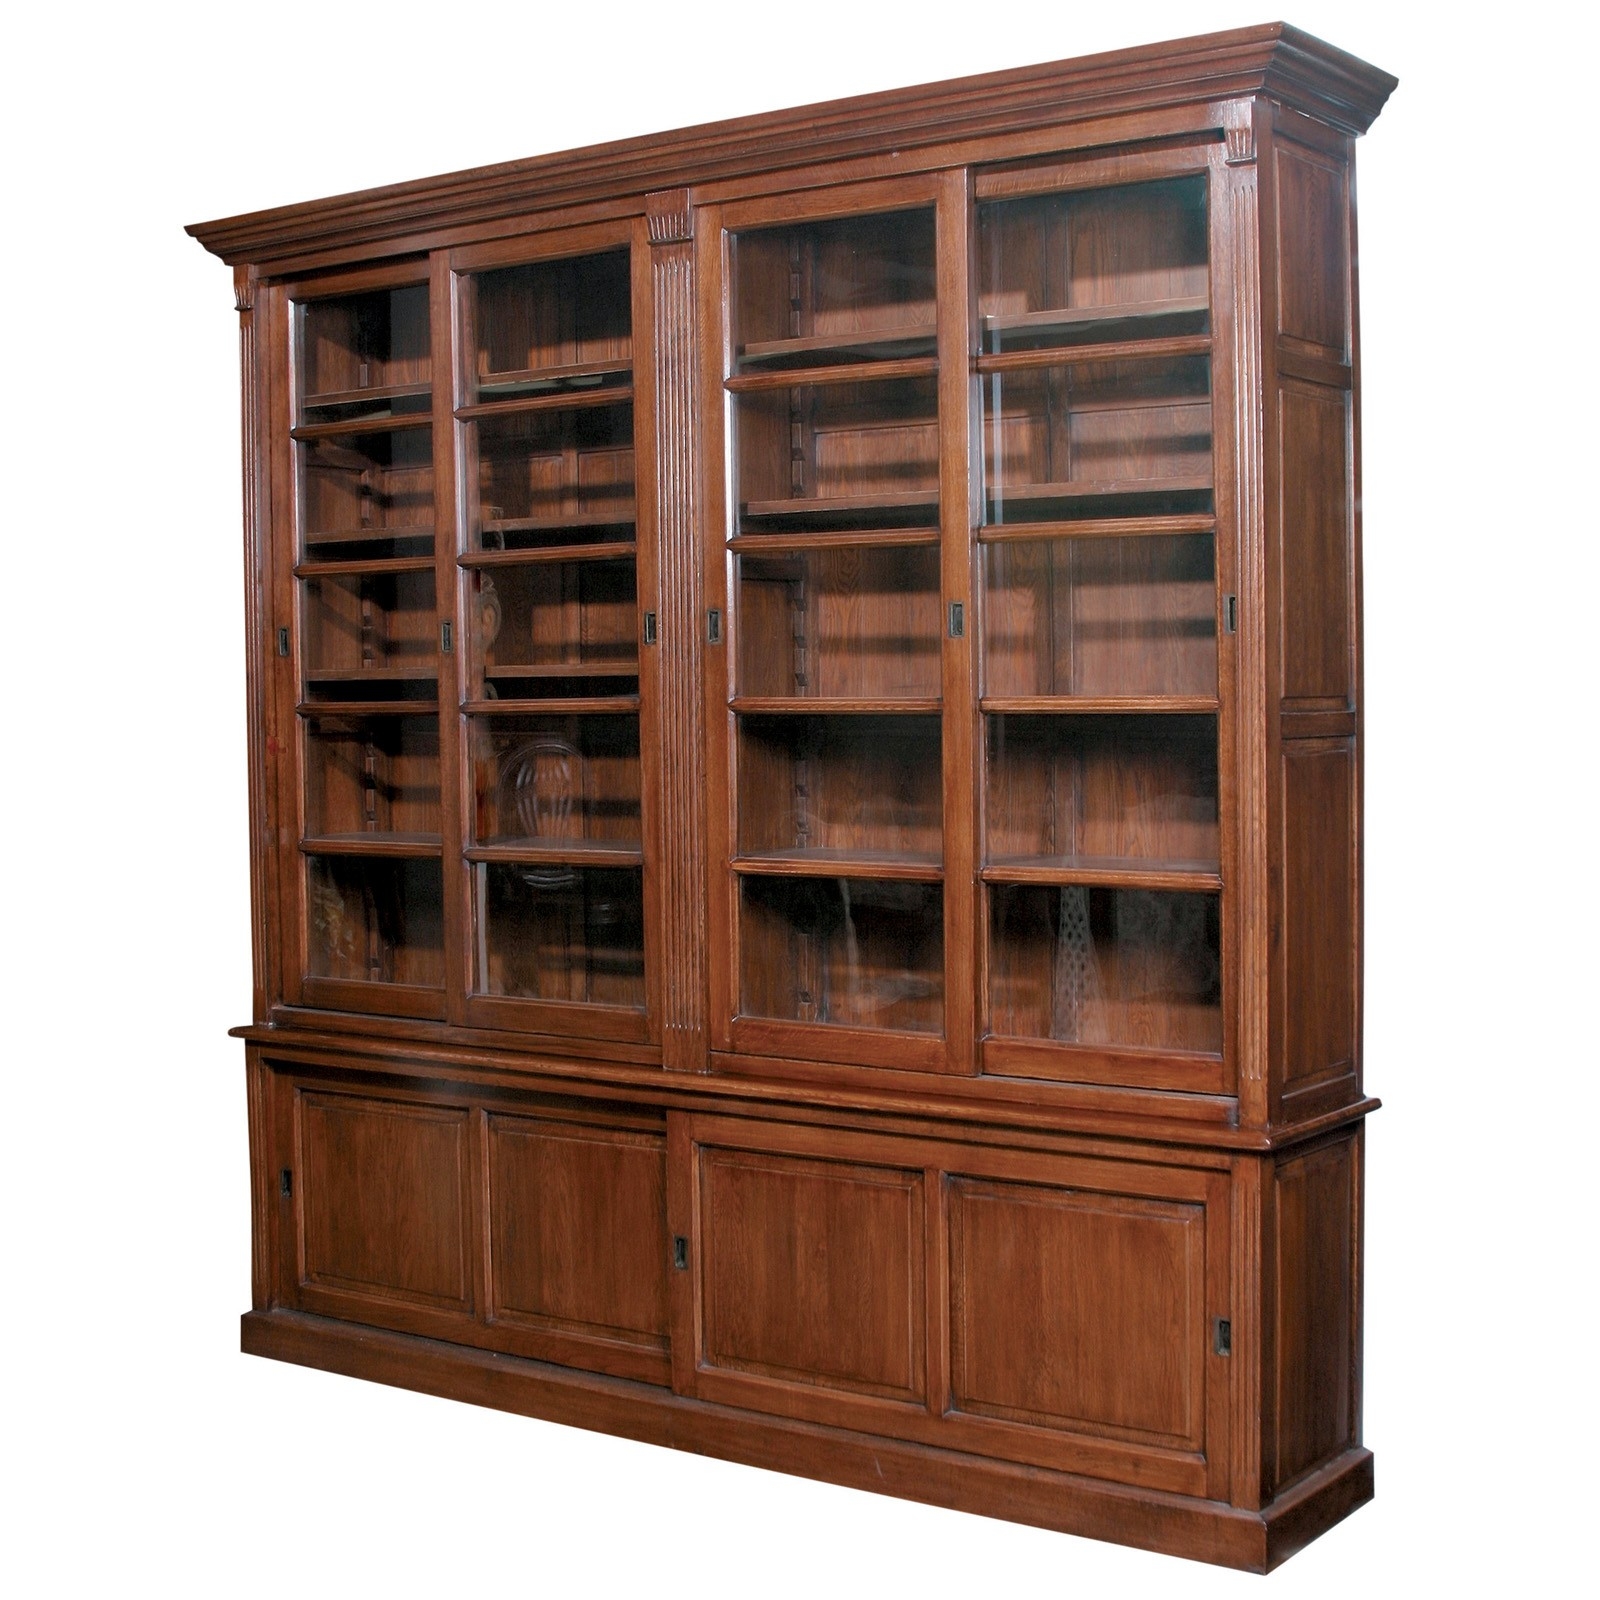 Antique Bookcases With Glass Doors